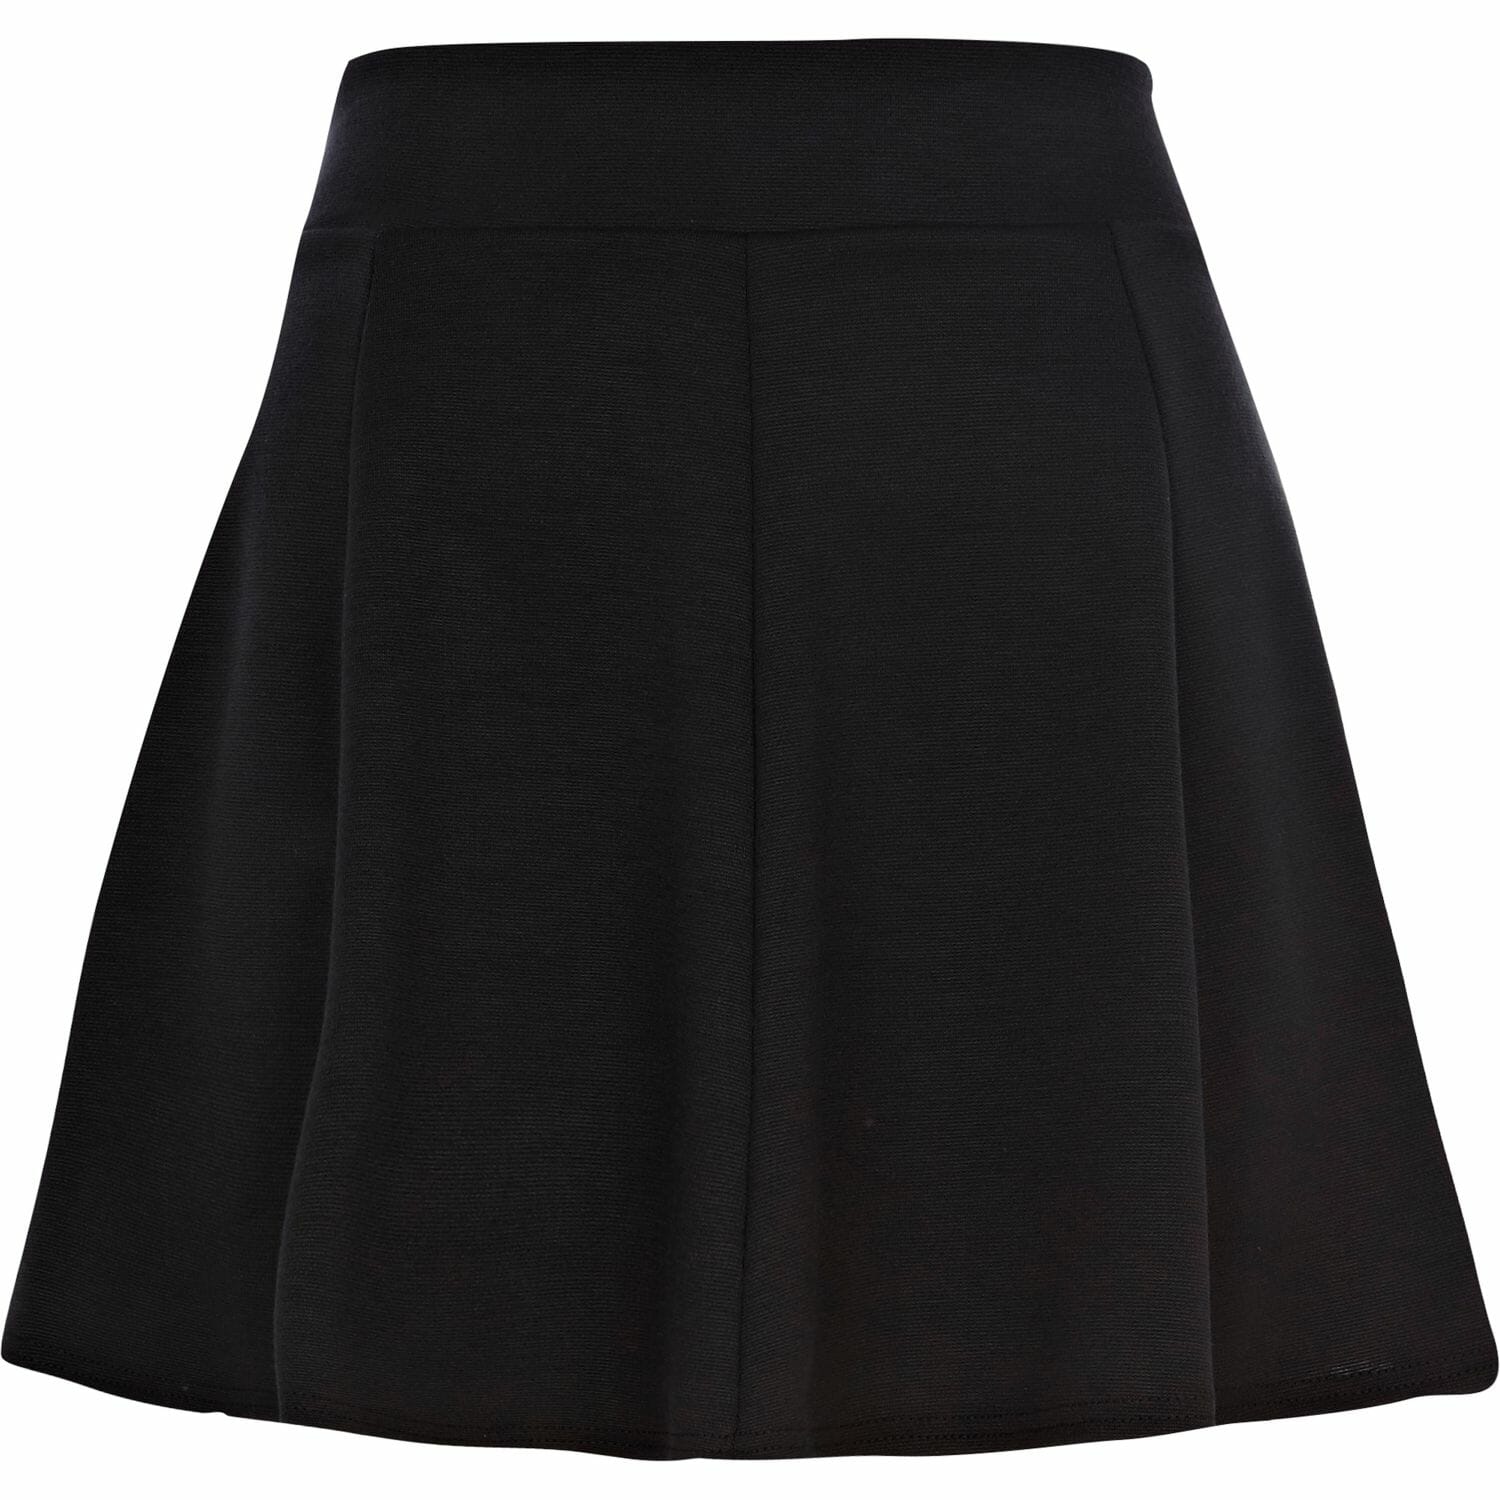 Ritual Clothing Stores Of Modern Skirts - Top Clothing Manufacturer ...